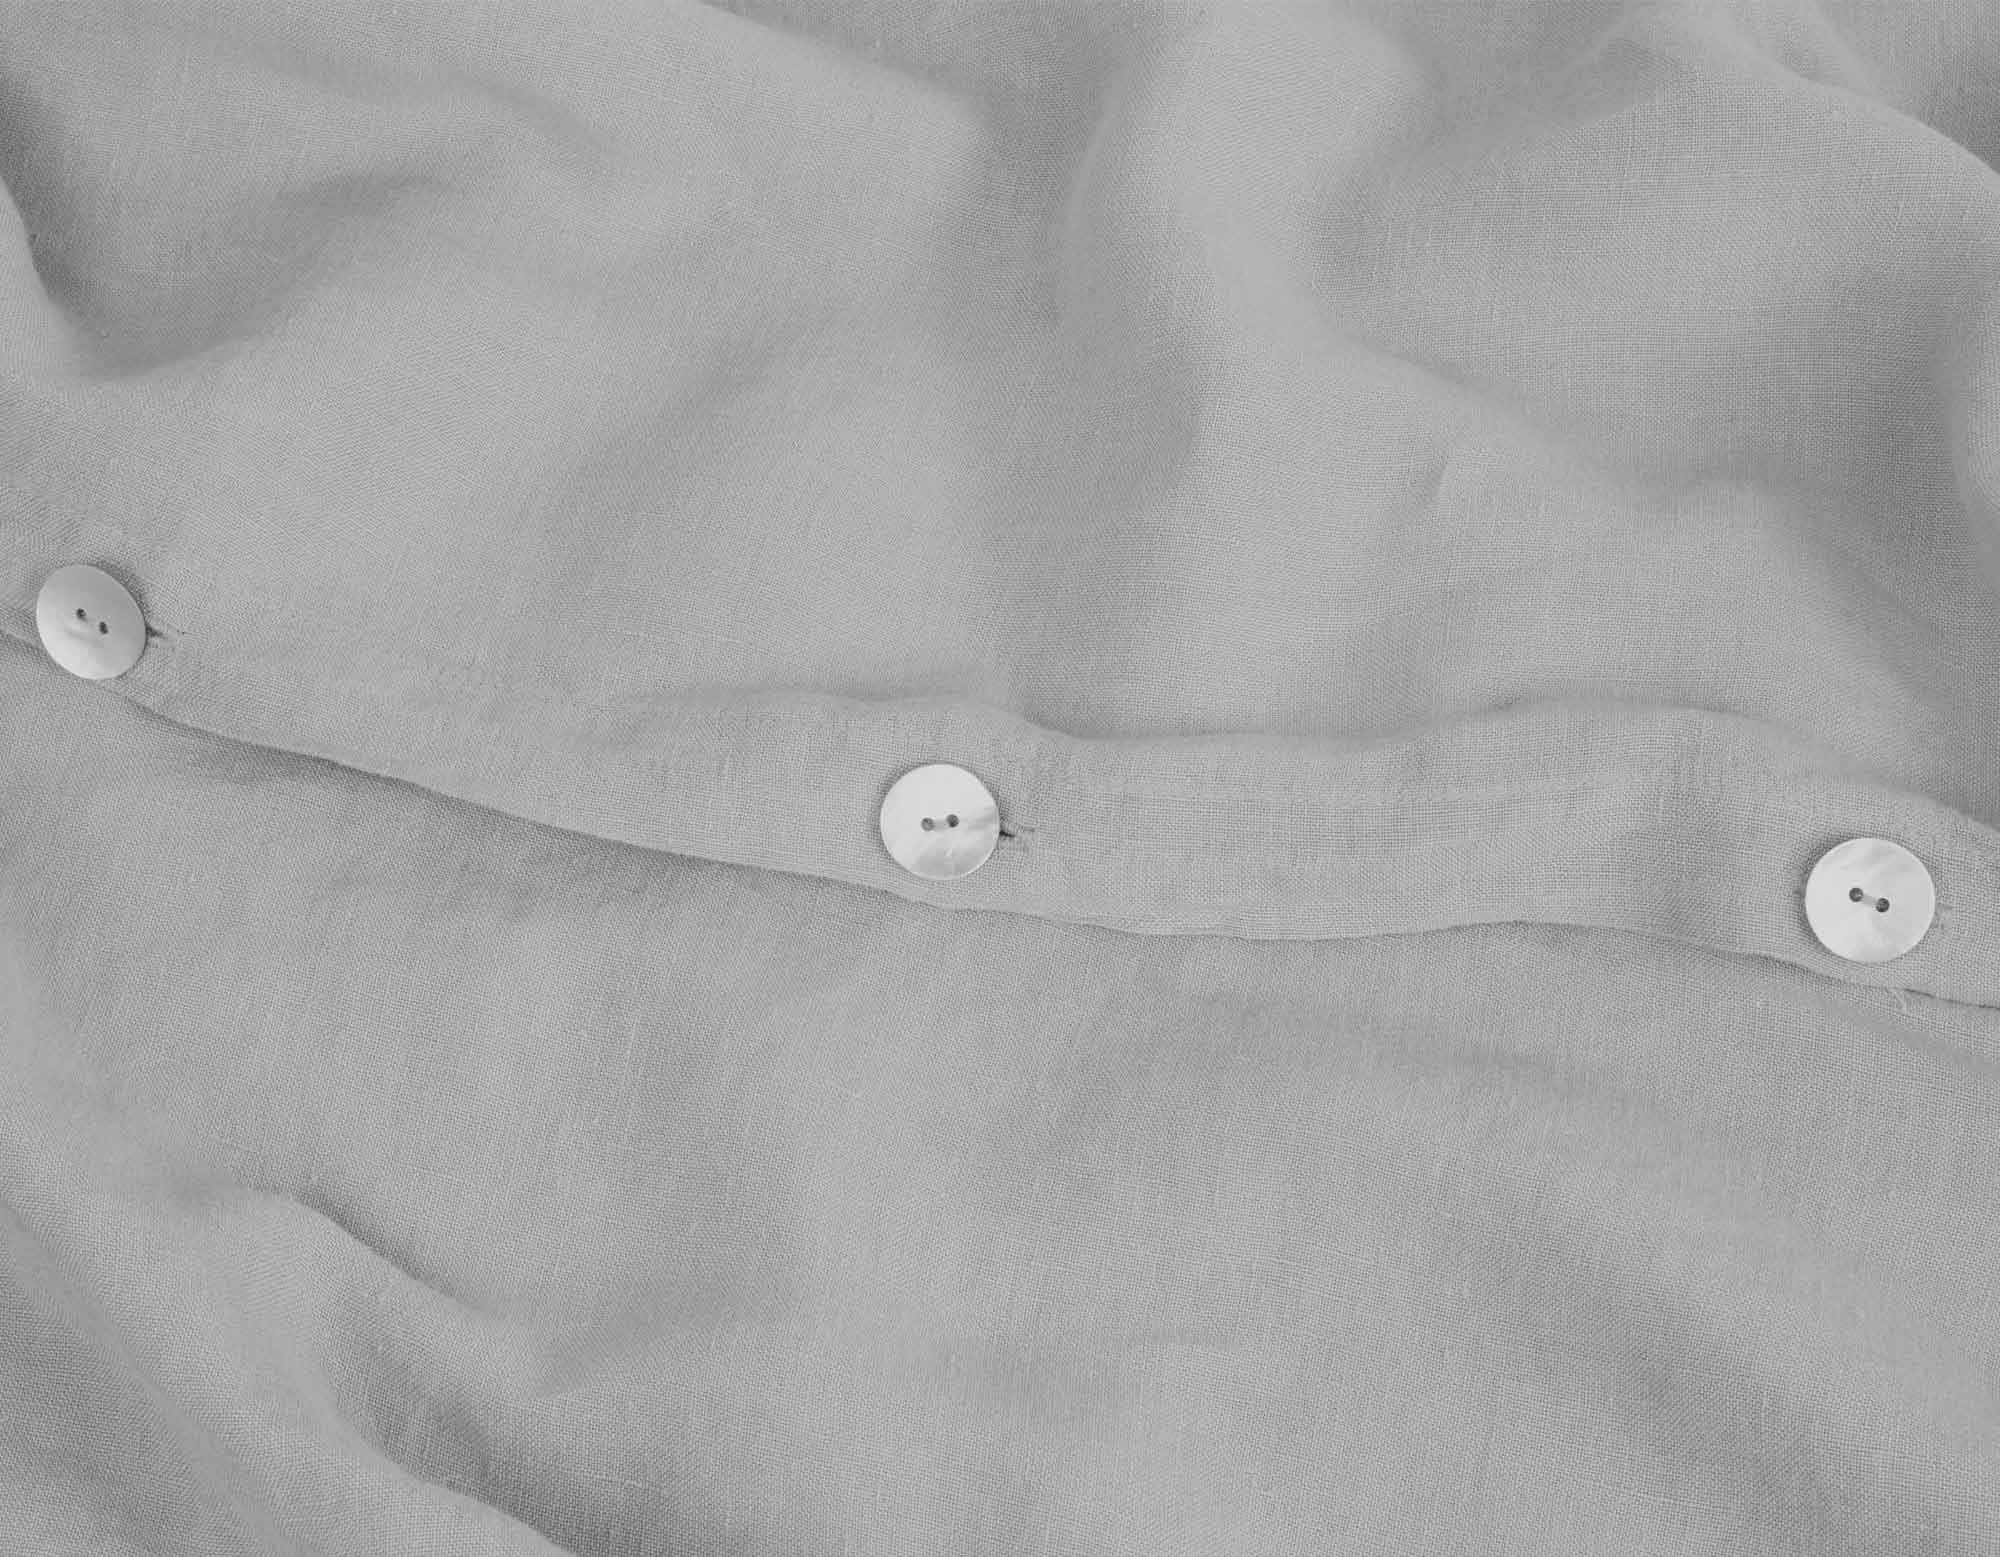 Superking linen duvet cover in calm grey with close-up of mother of pearl buttons